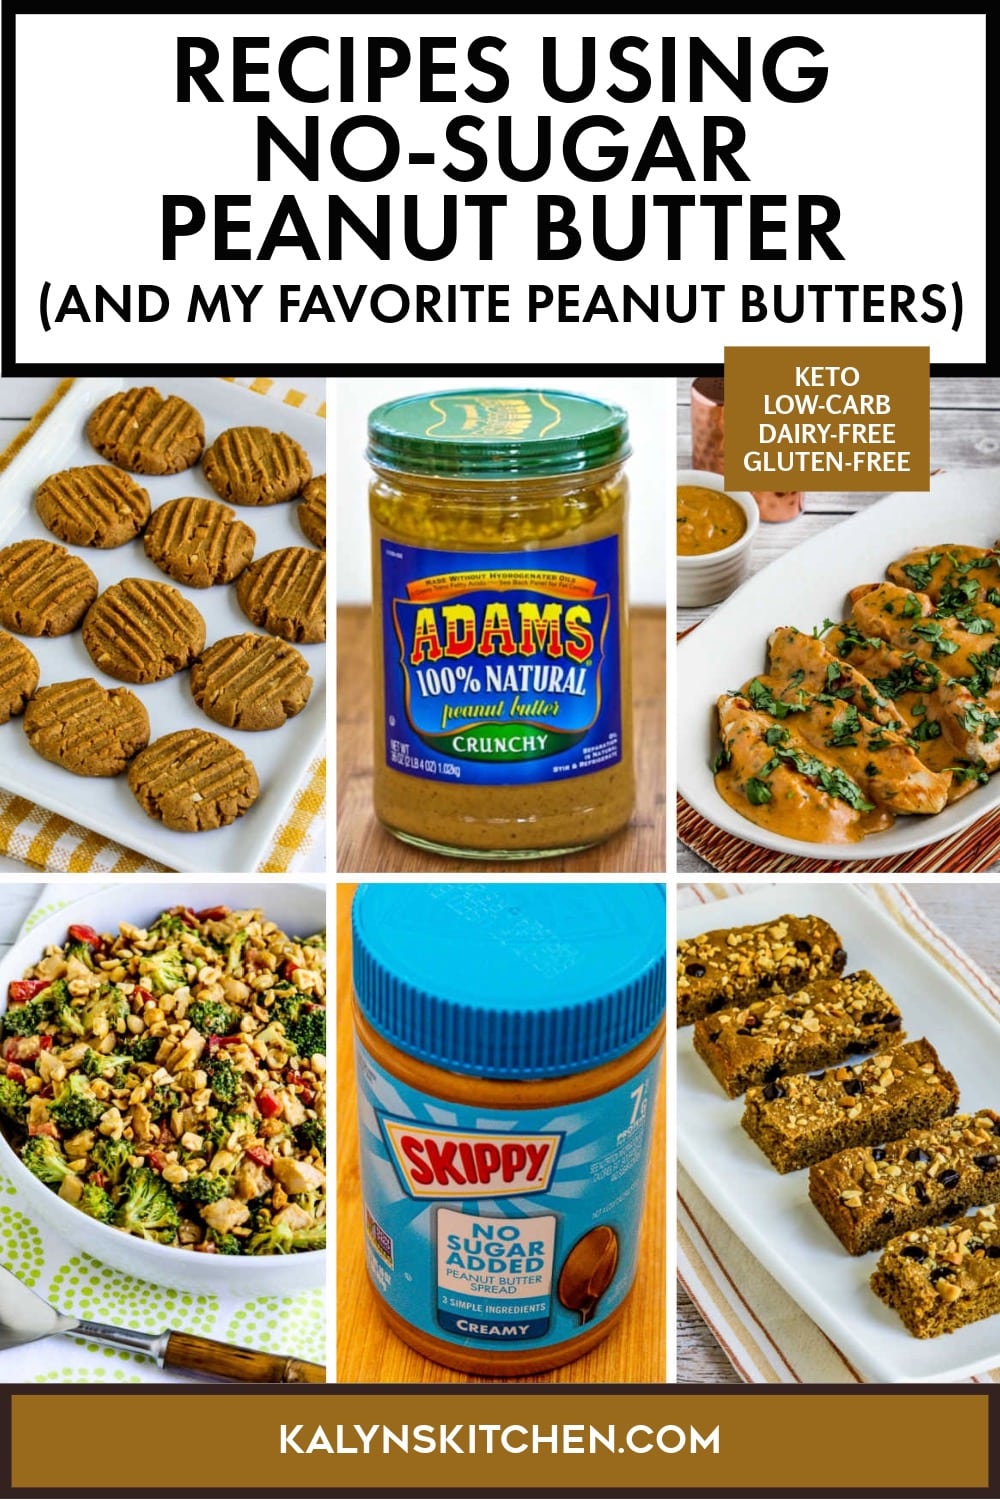 Pinterest image of Recipes using No-Sugar Peanut Butter (and My Favorite Peanut Butters)